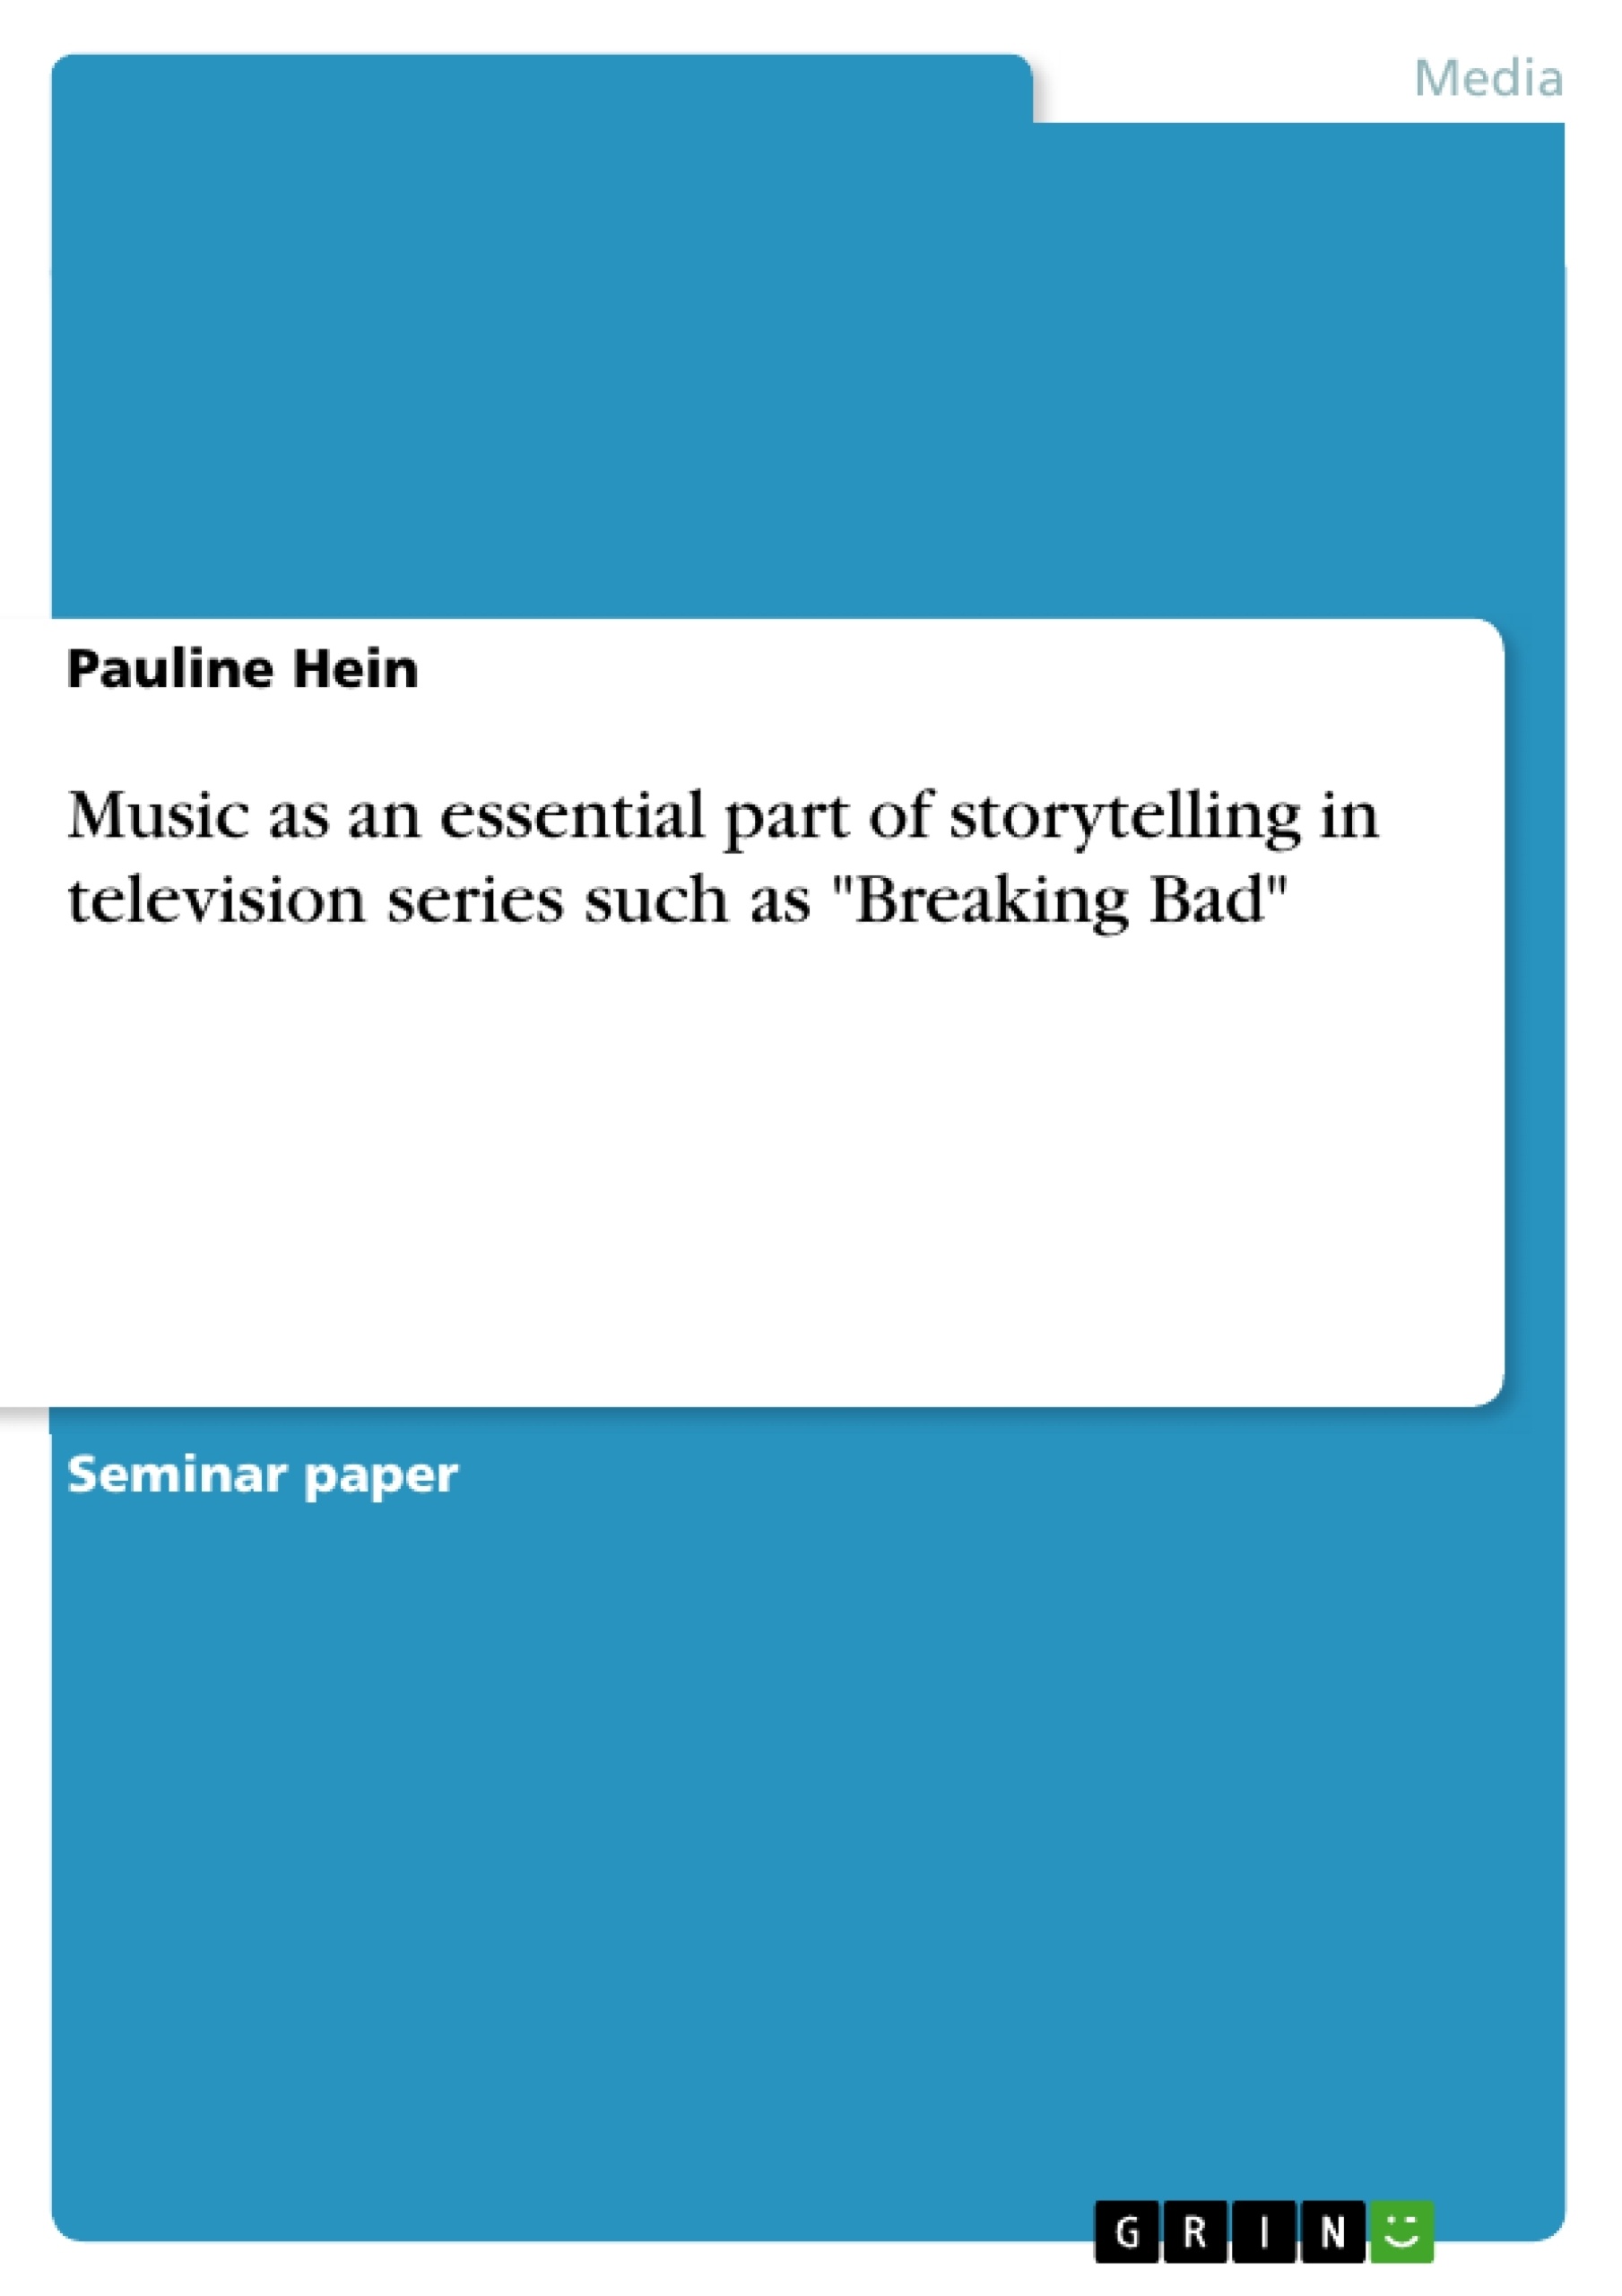 Title: Music as an essential part of storytelling in television series such as "Breaking Bad"